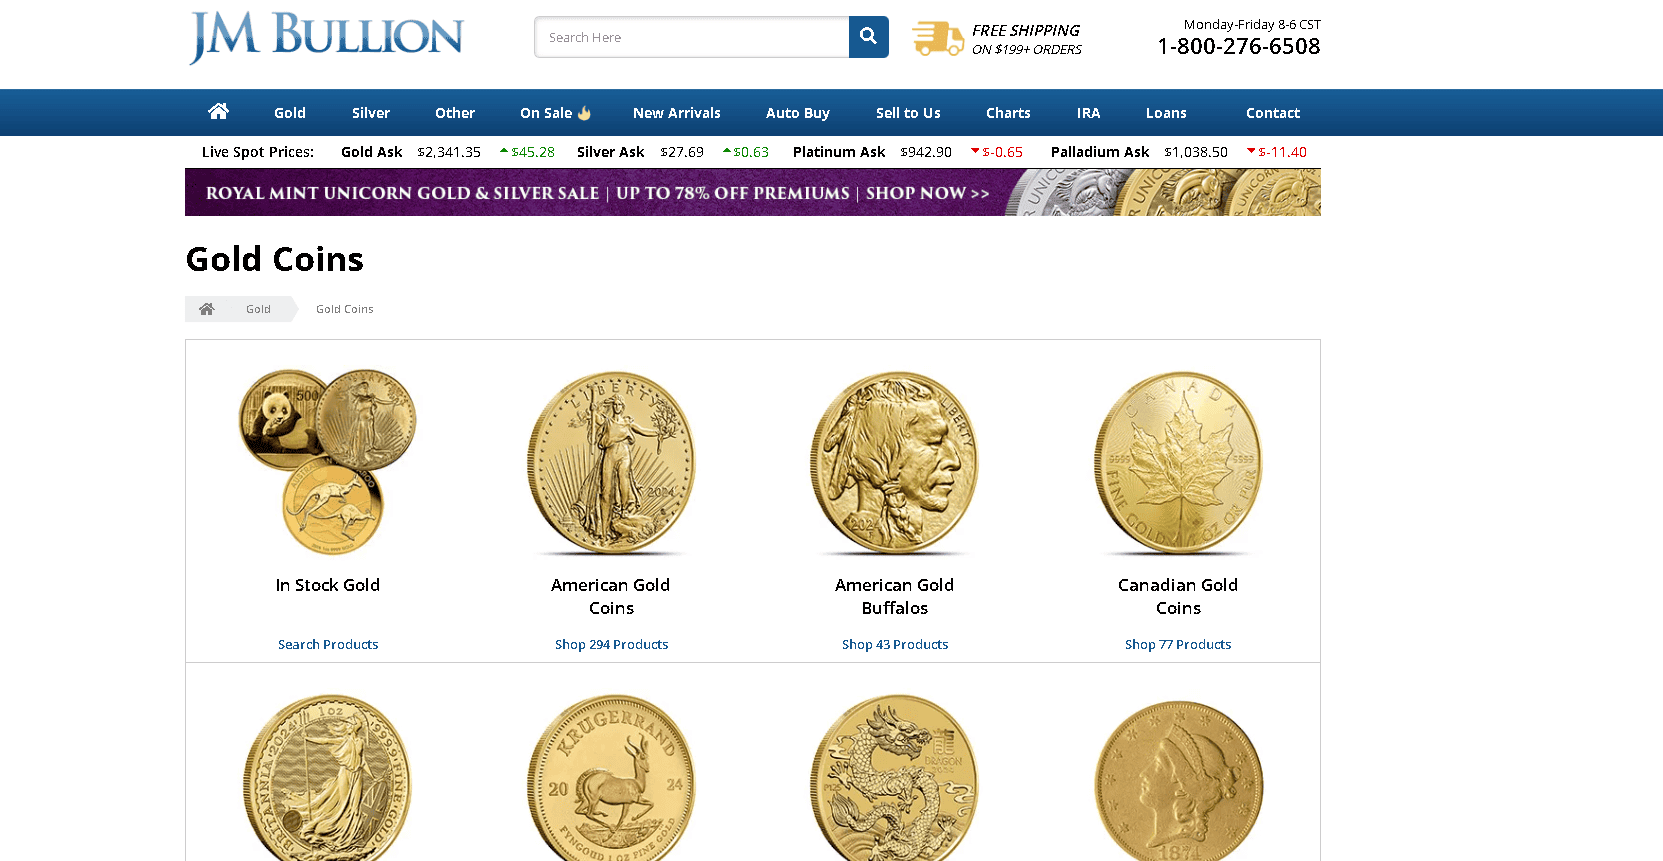 JM Bullion don't sell fake gold coins and bars. They sell real gold bullion.